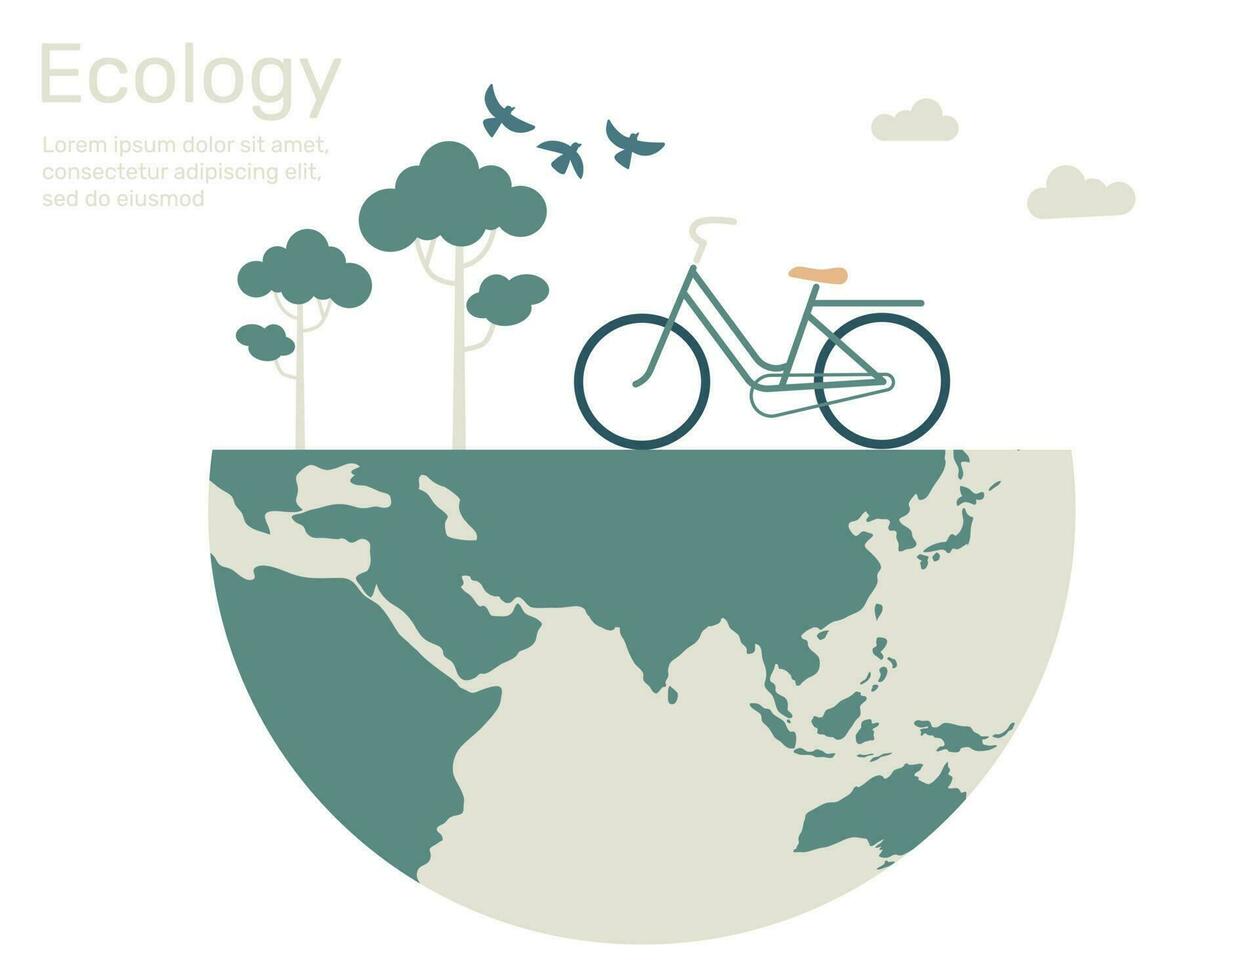 Bicycle with tree, bird, cloud on globe, Green city life ecology concept. Vector design illustration.